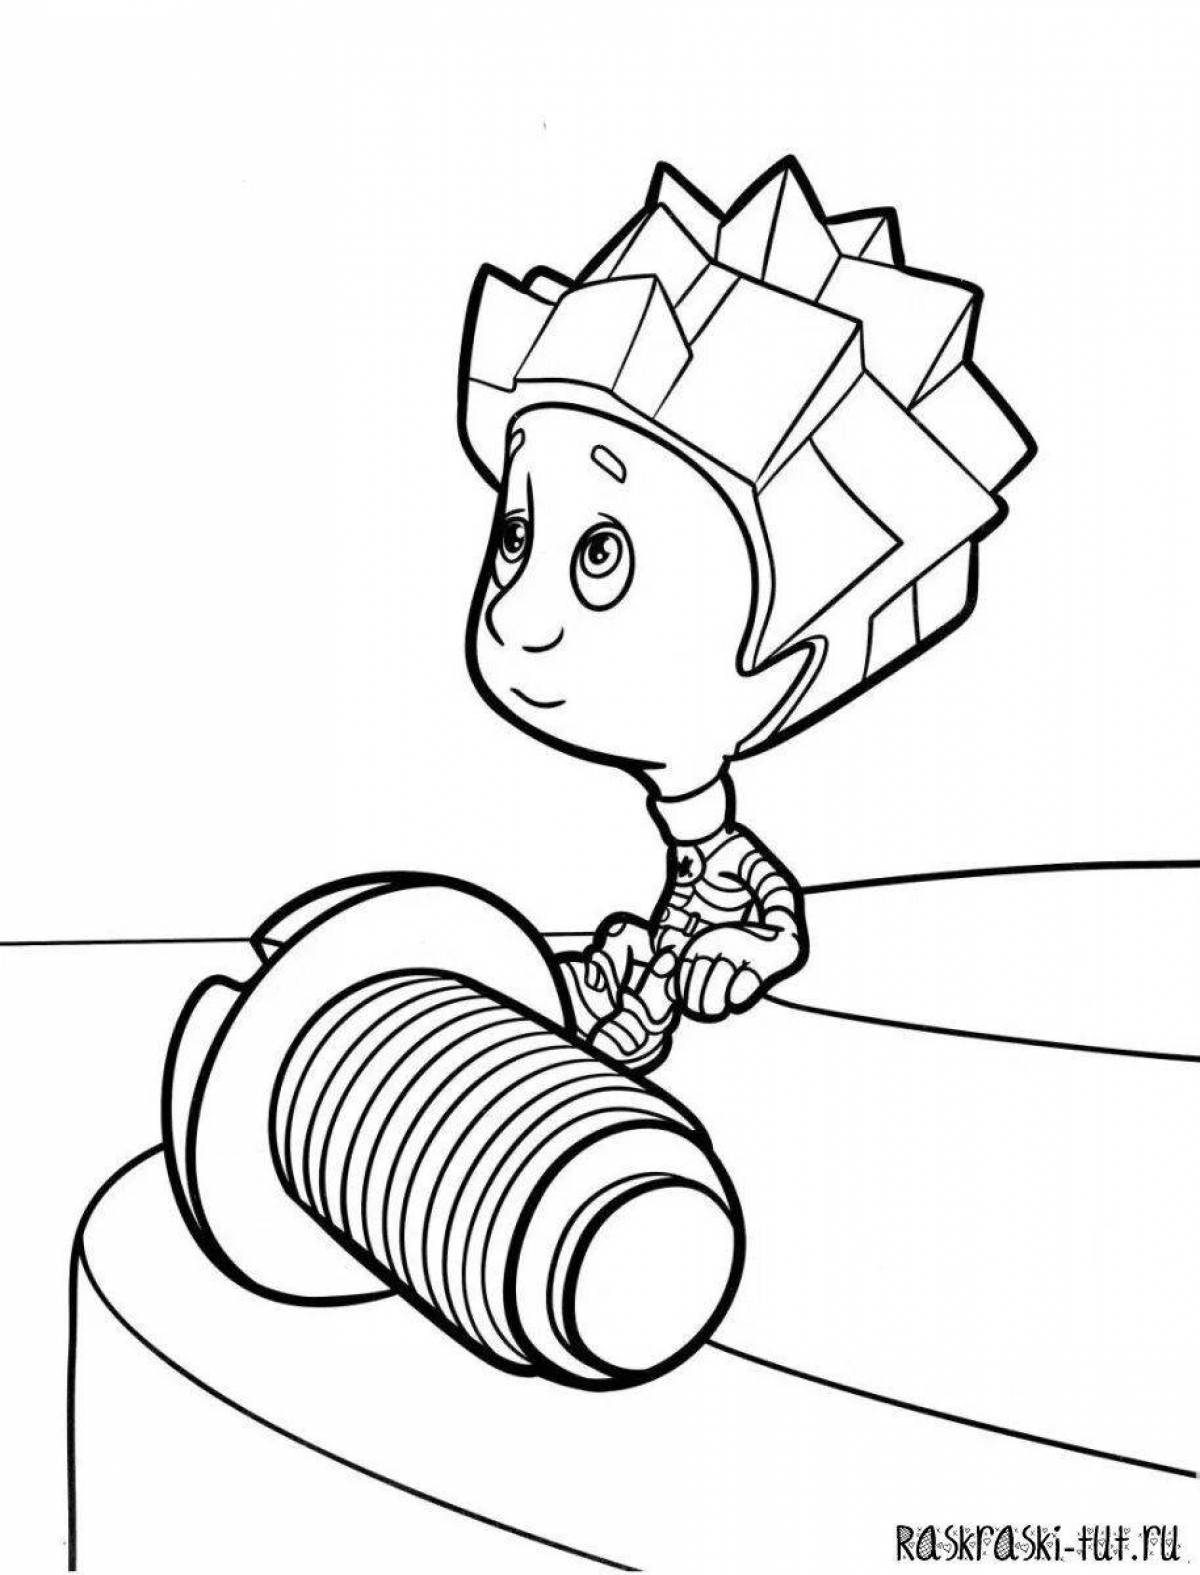 Showy fixies coloring pages for boys